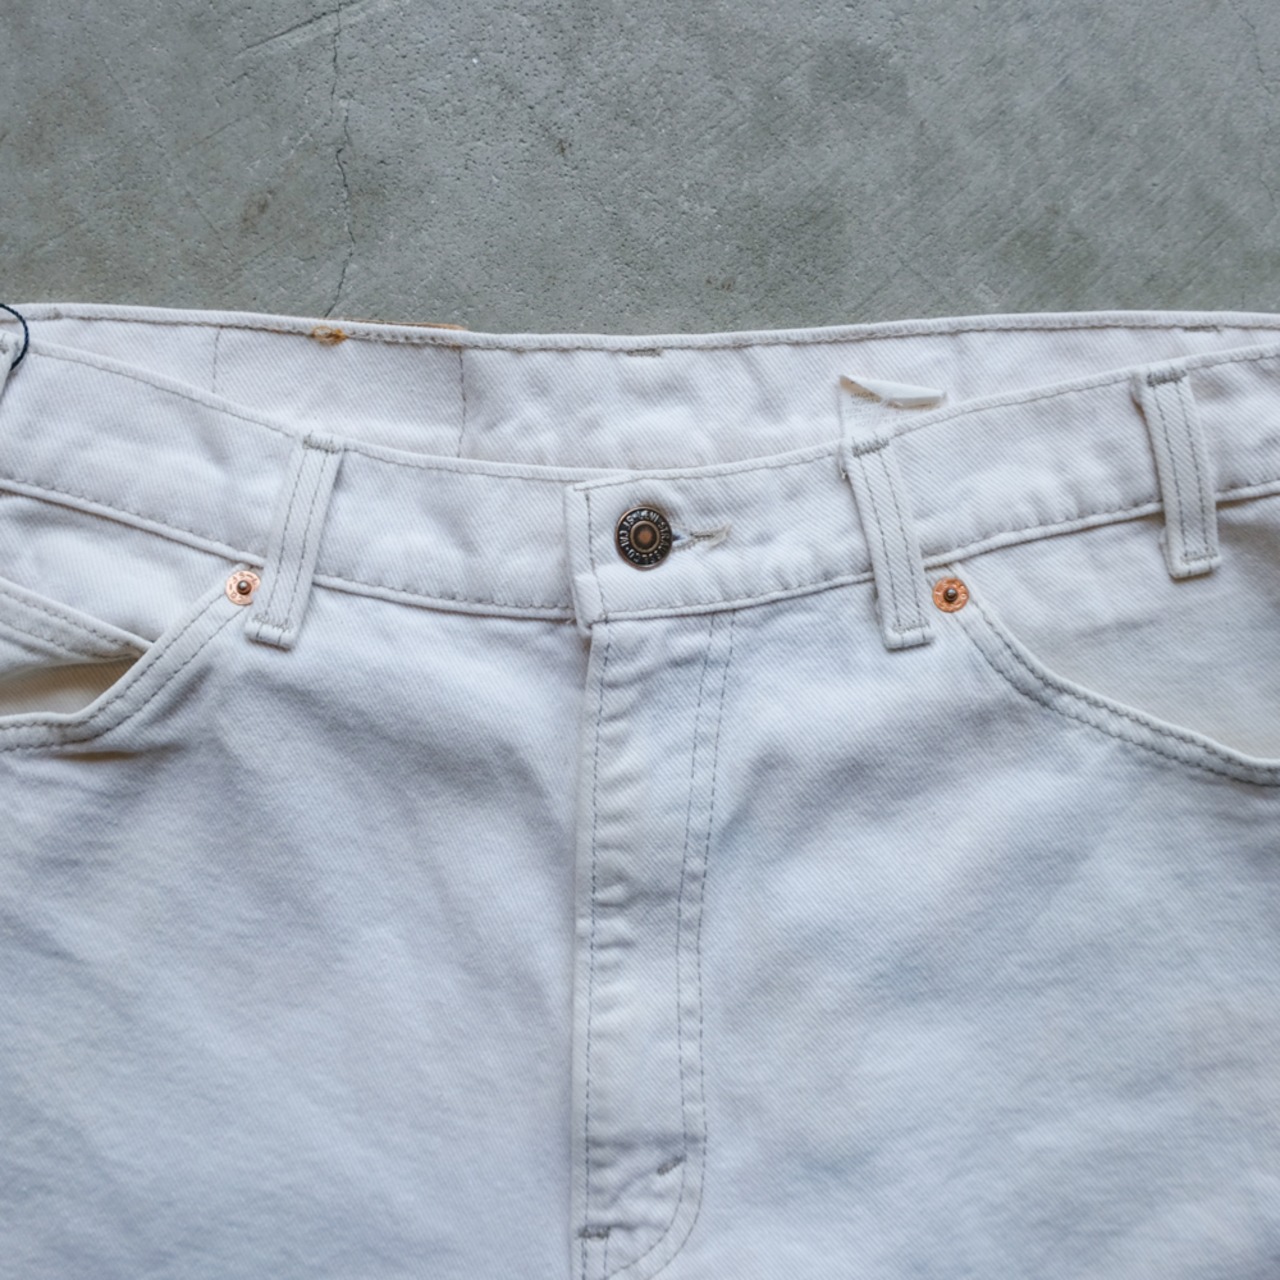 Levi's 550 Half Pants White made in USA